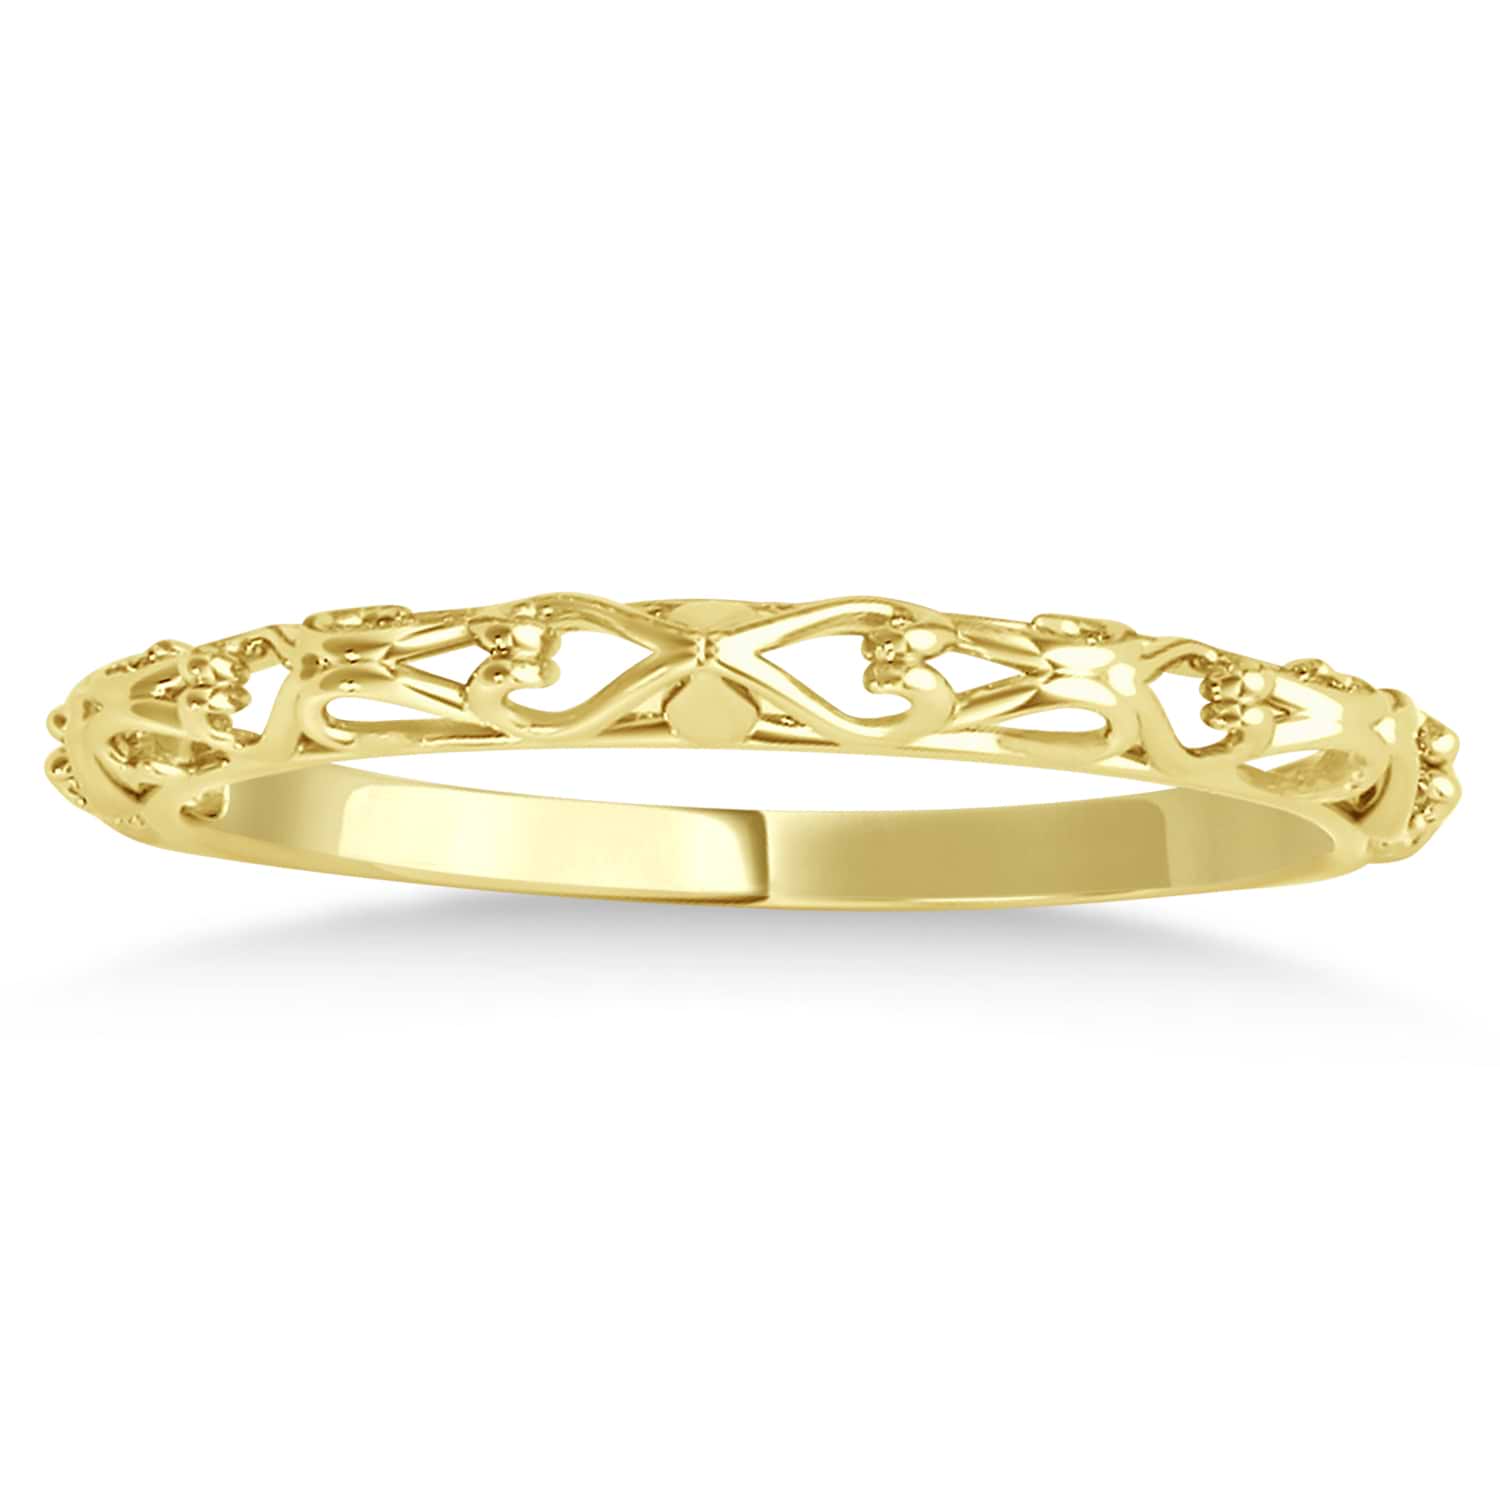 Antique Style Open Scrollwork Wedding Band 14k Yellow Gold